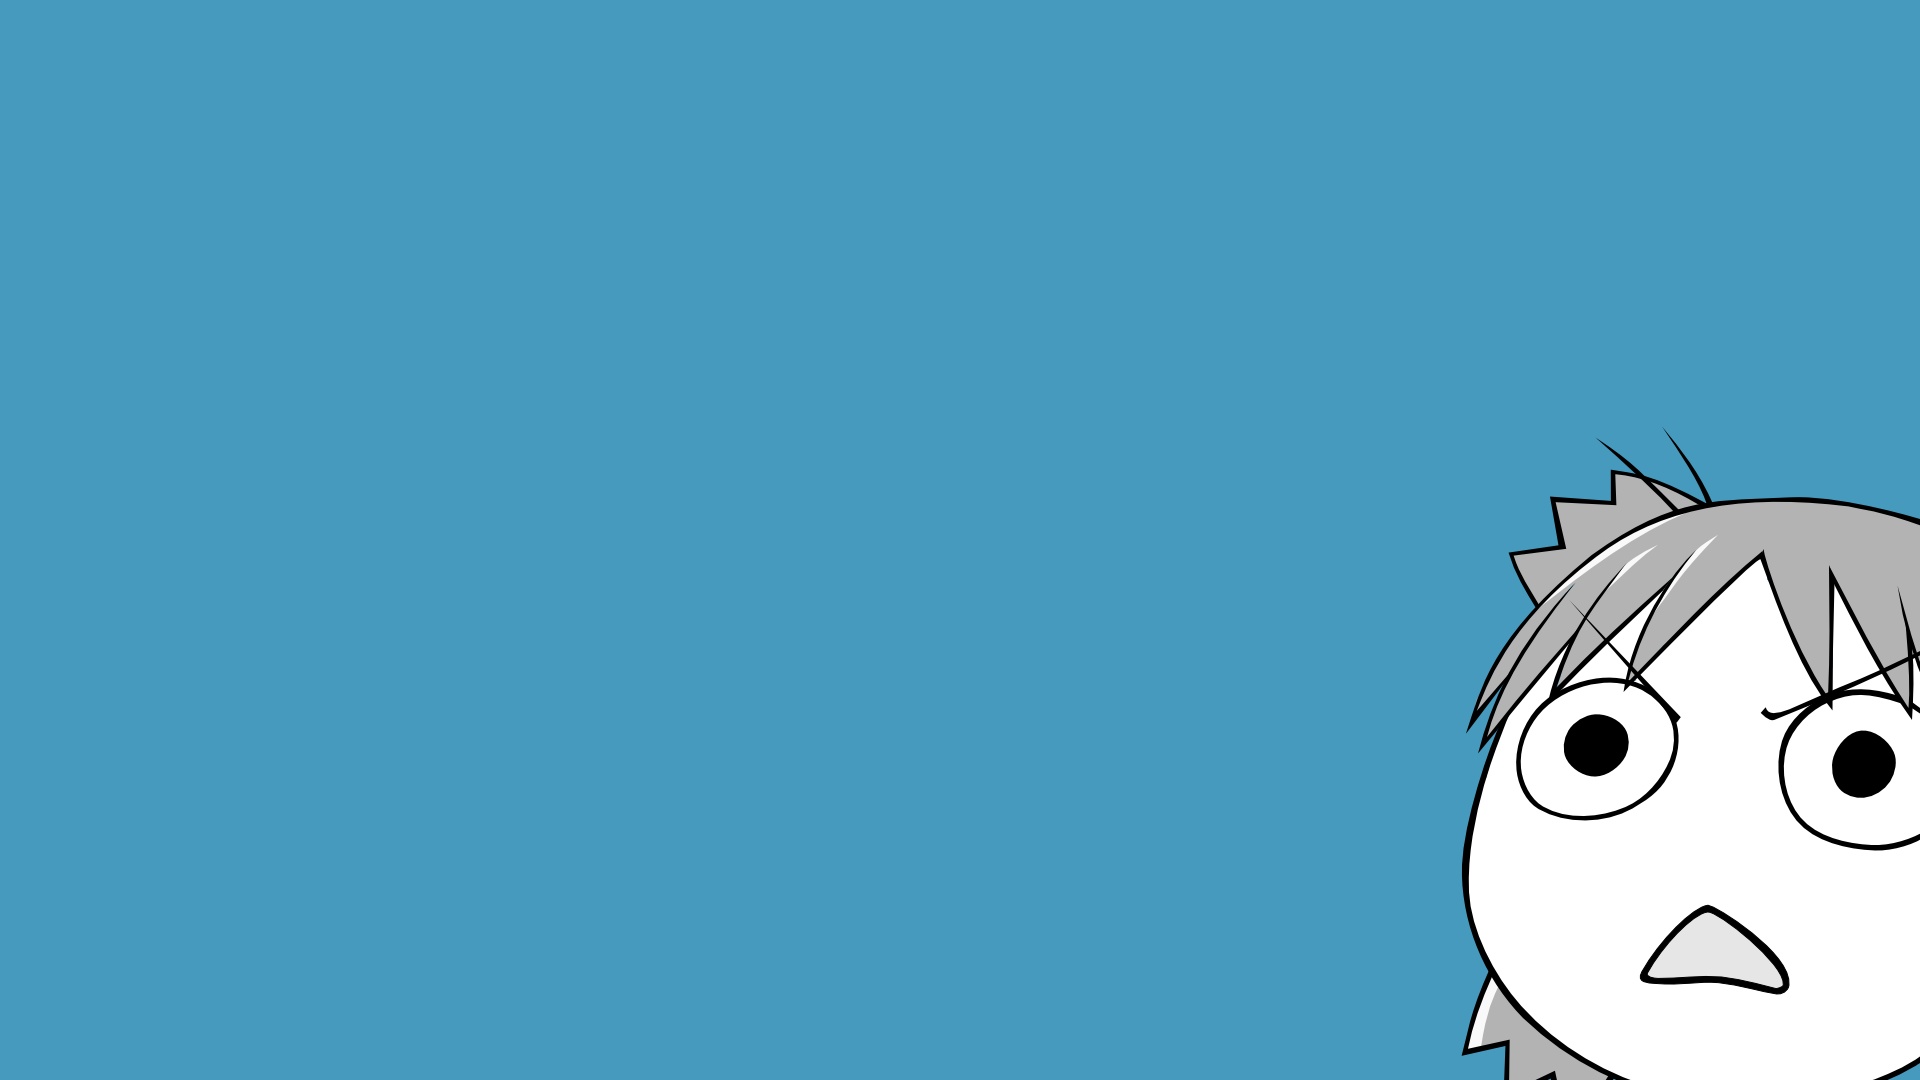 Free Download 19x1080 Yotsuba On Blue Desktop Pc And Mac Wallpaper 19x1080 For Your Desktop Mobile Tablet Explore 77 Yotsuba Wallpaper Yotsuba Wallpaper Yotsuba Nakano Wallpapers